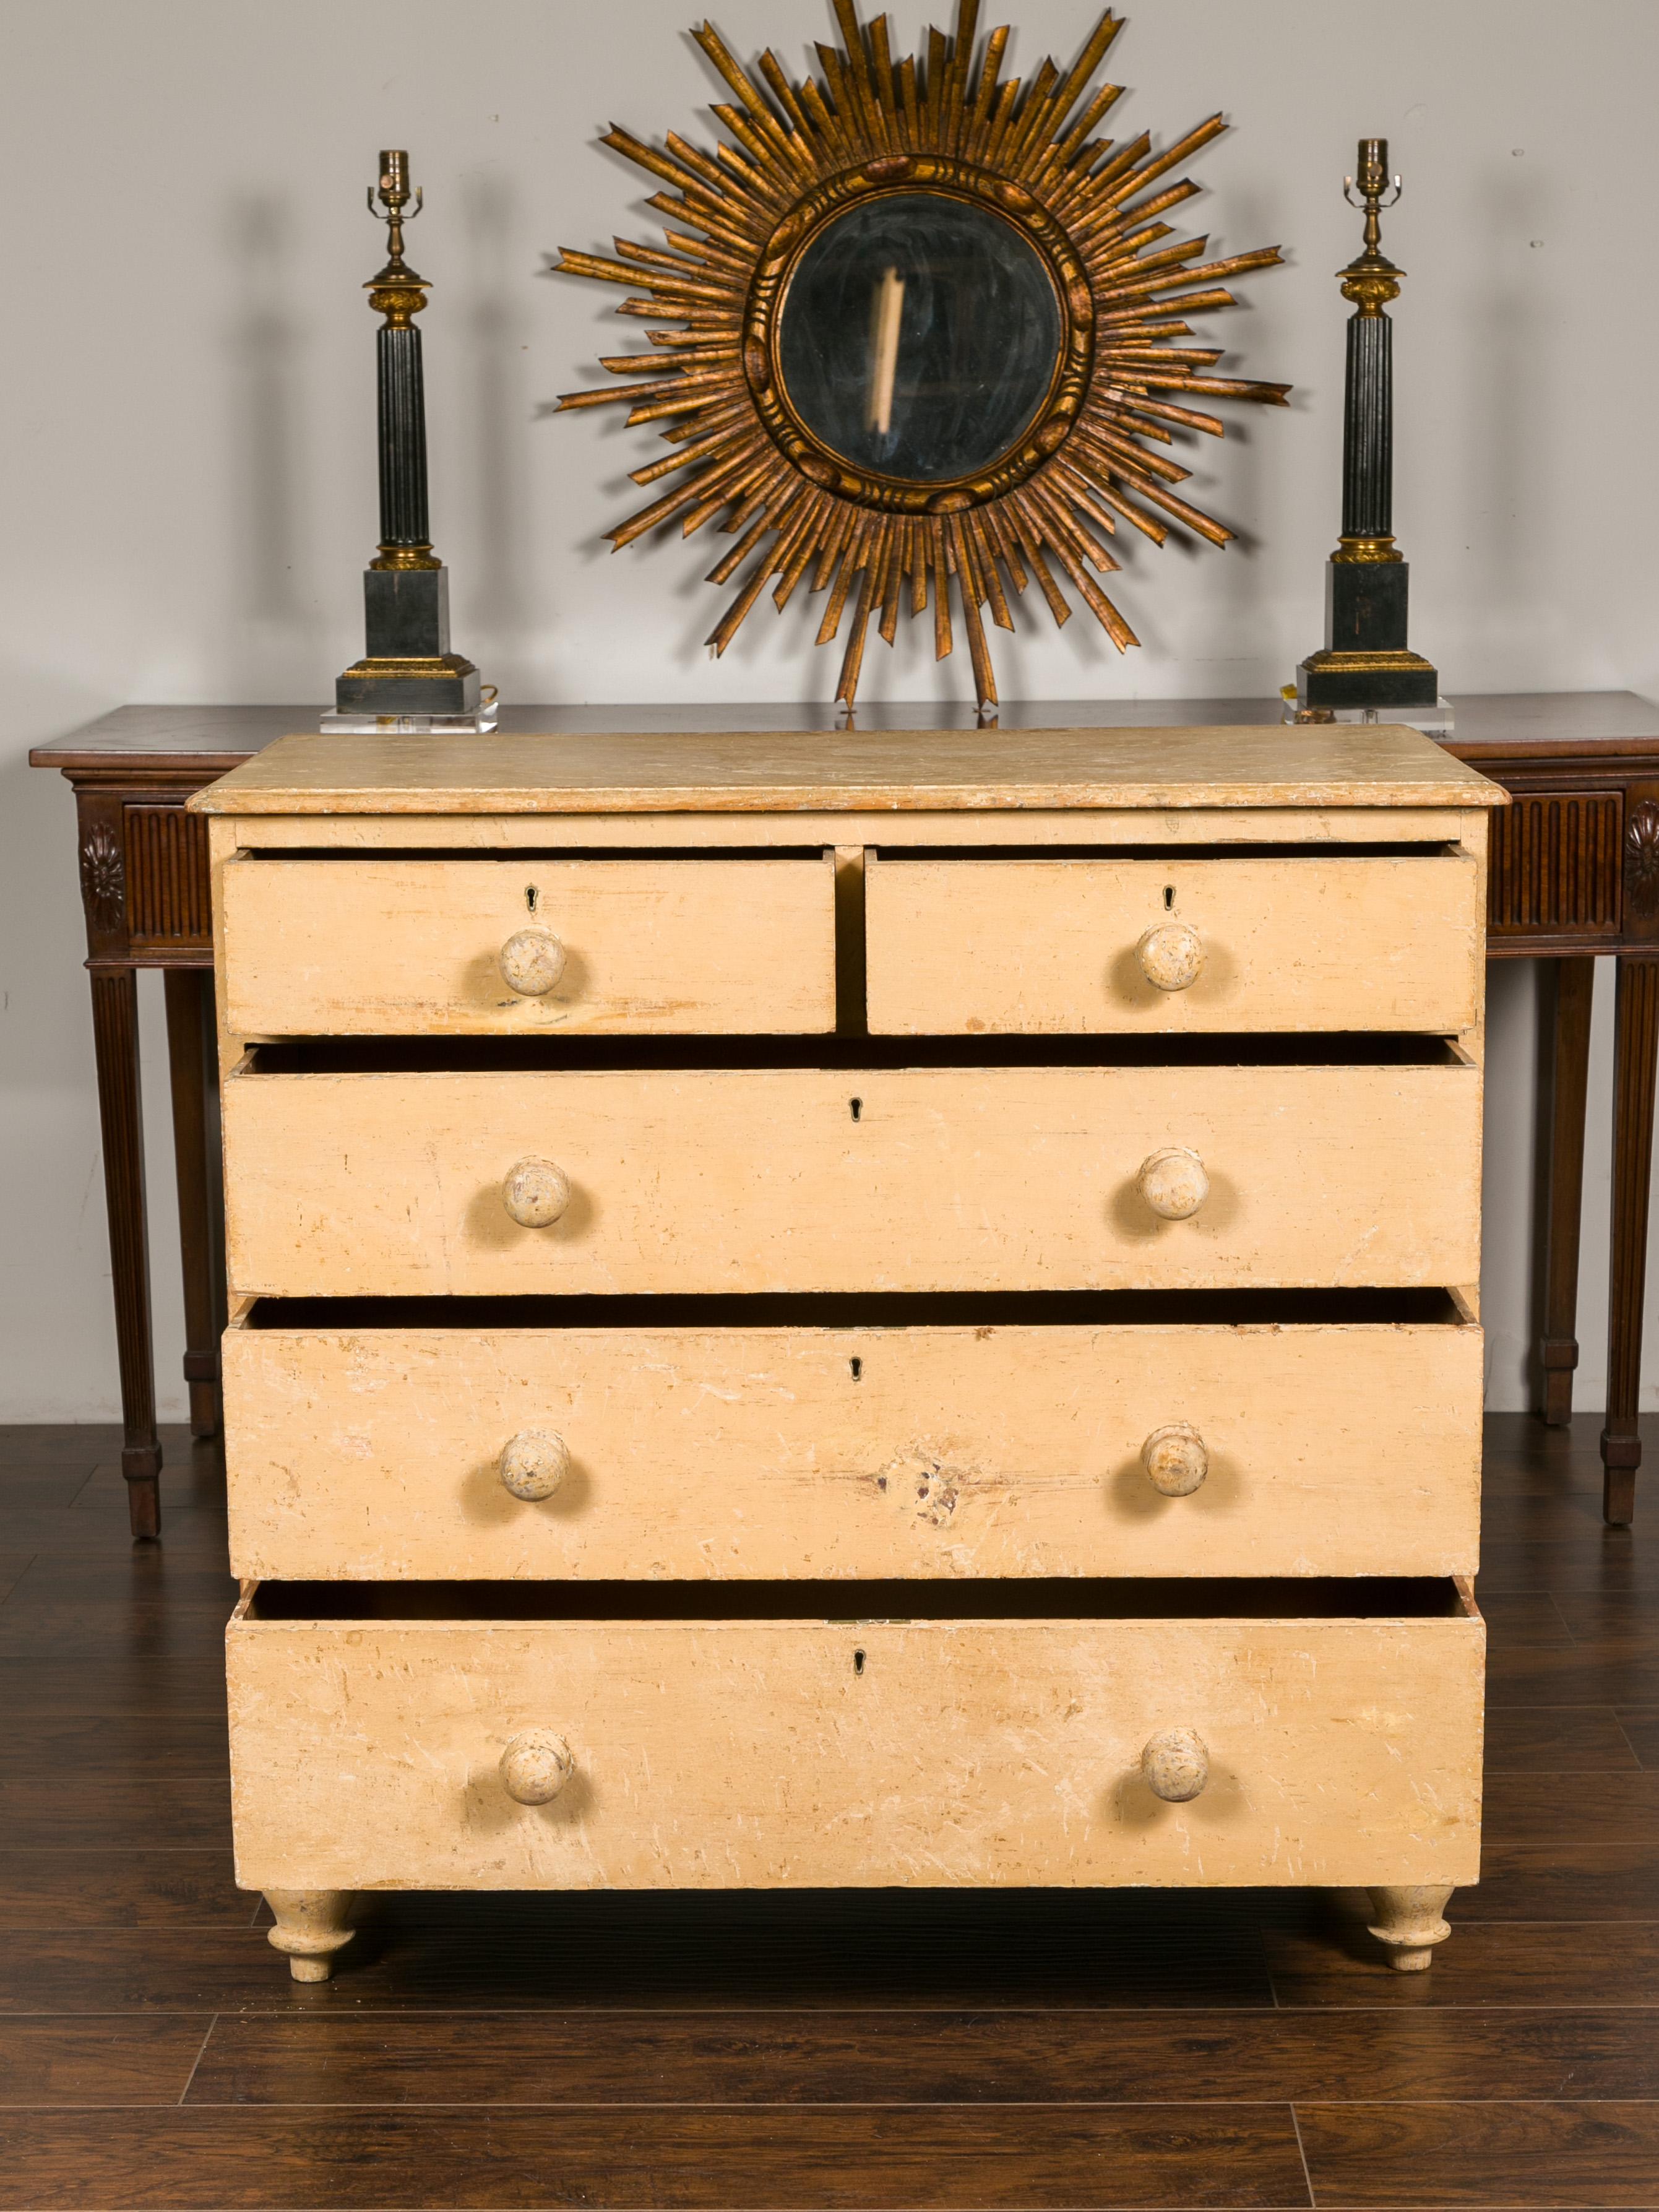 English 1860s Painted Wood Five-Drawer Chest with Turnip Feet and Wooden Pulls For Sale 5